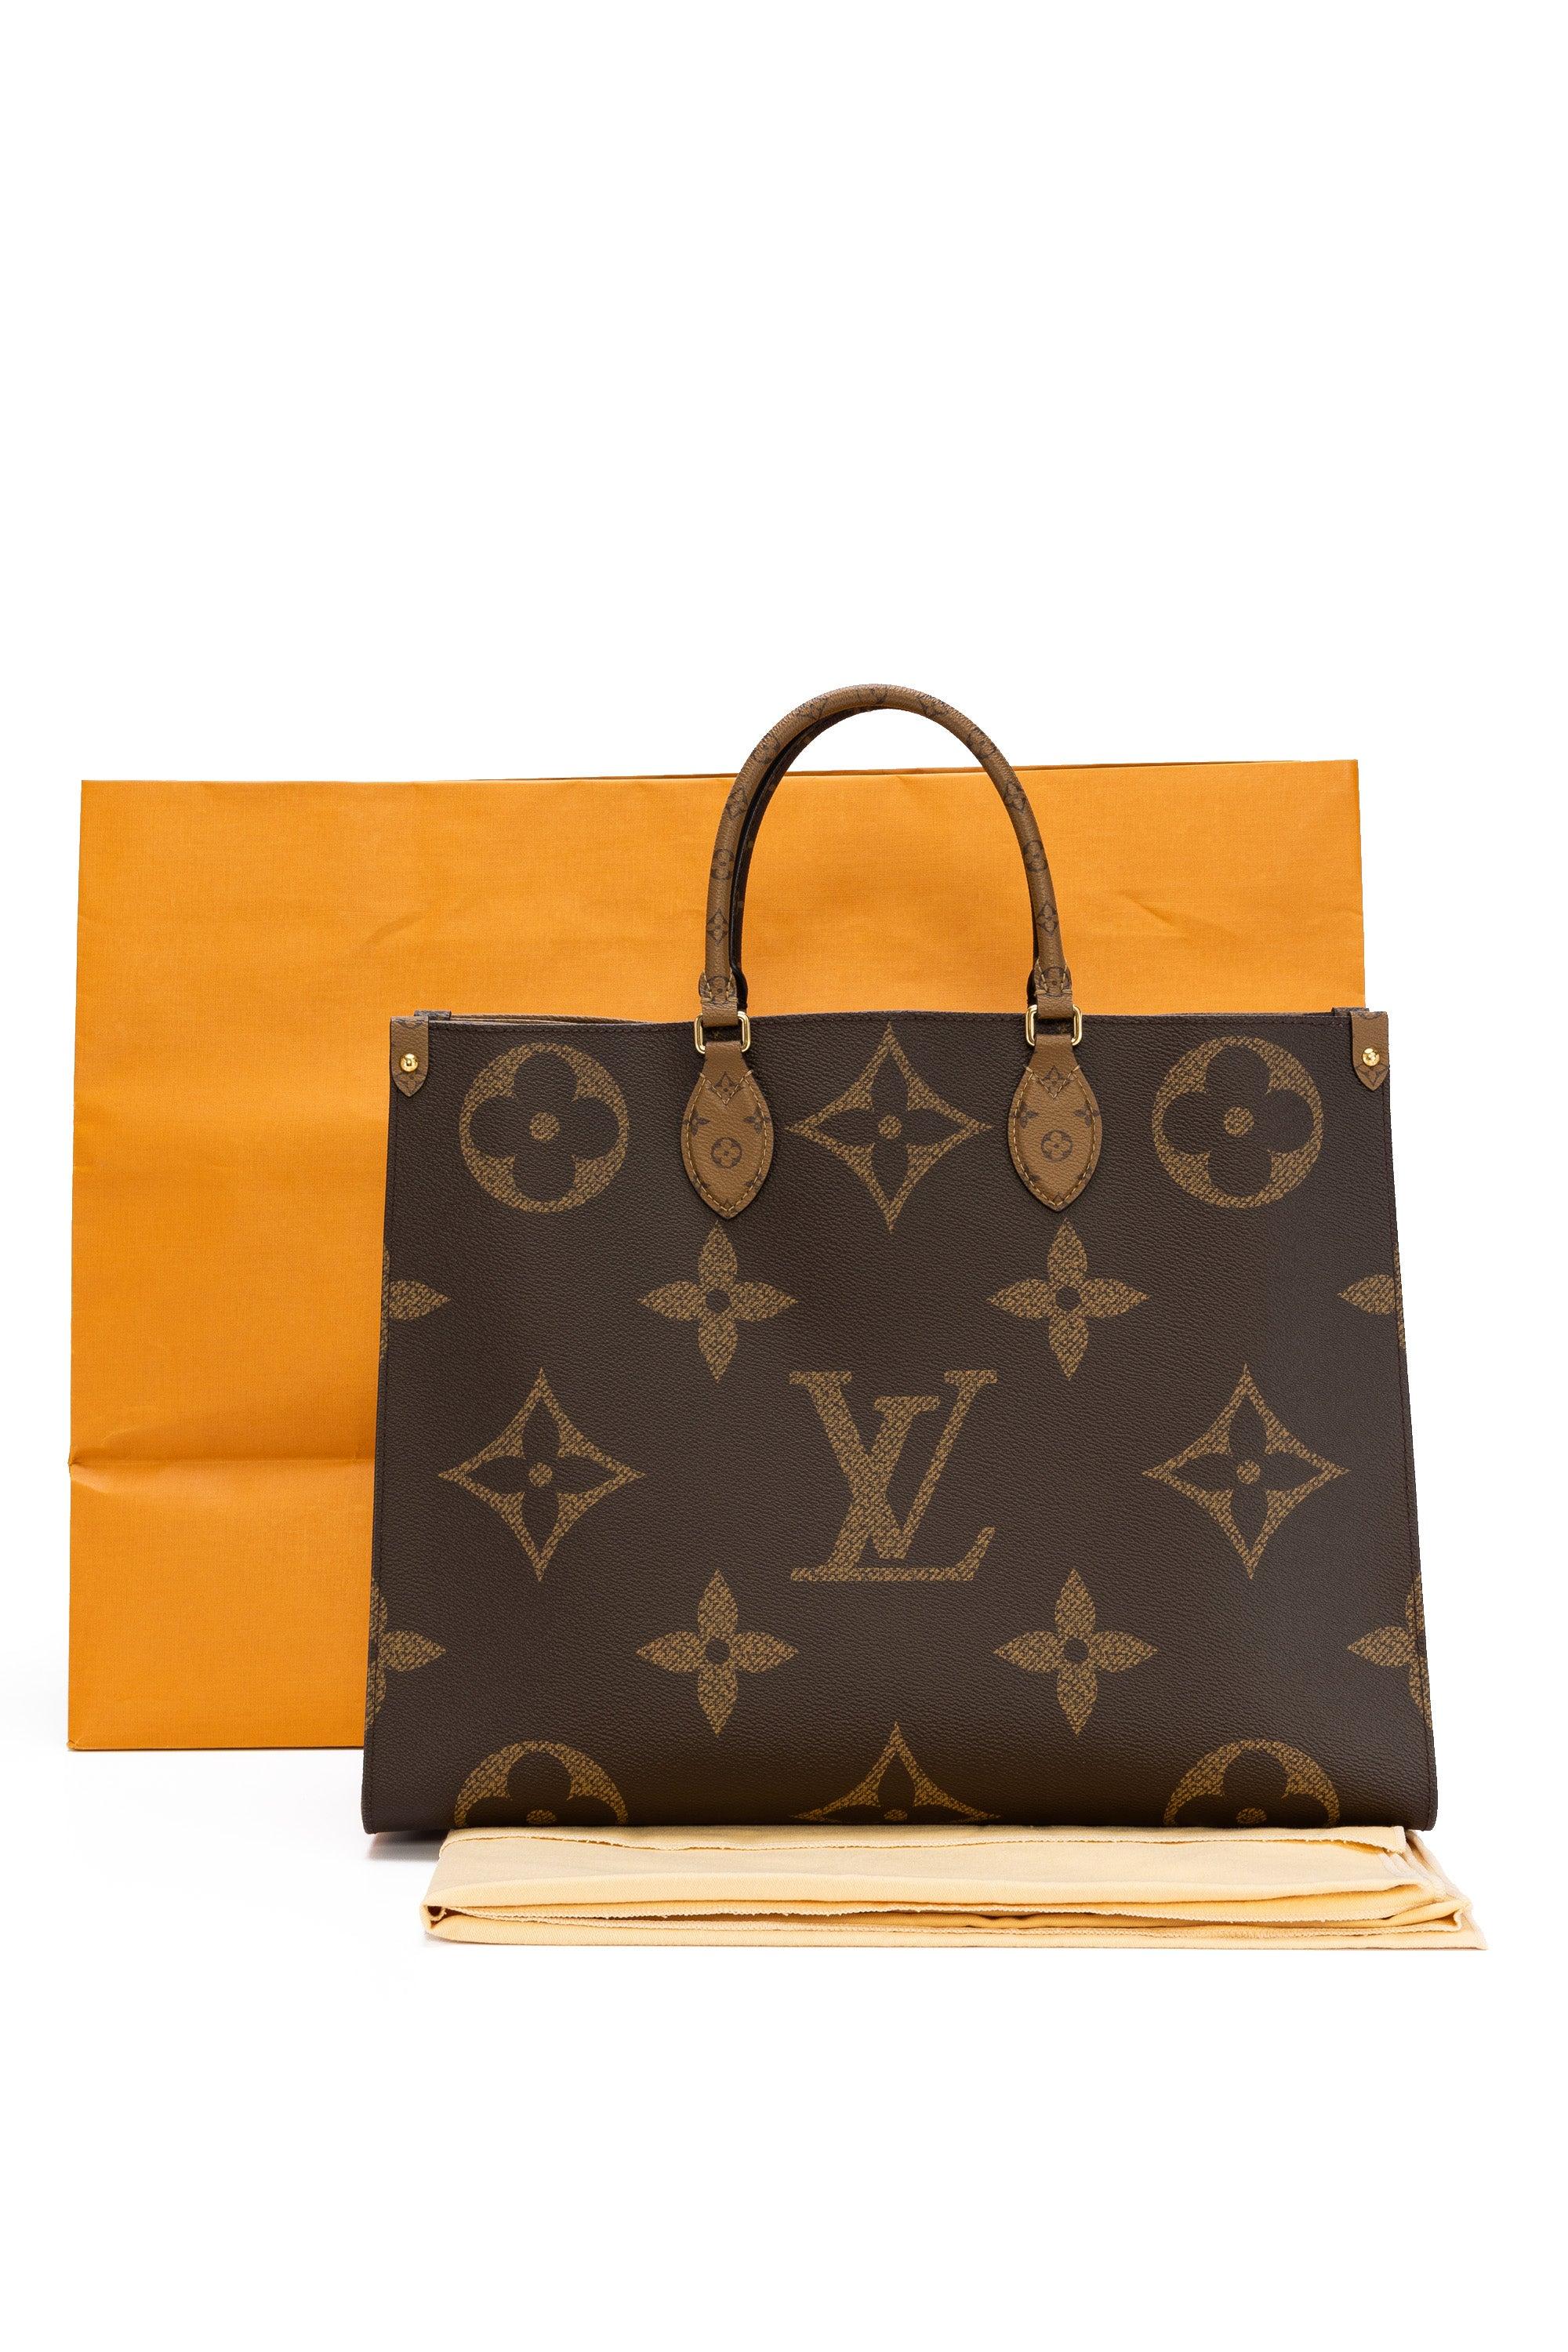 LOUIS VUITTON ON THE GO GM TOTE BAG RED/PINK/YELLOW MONOGRAM GIANT